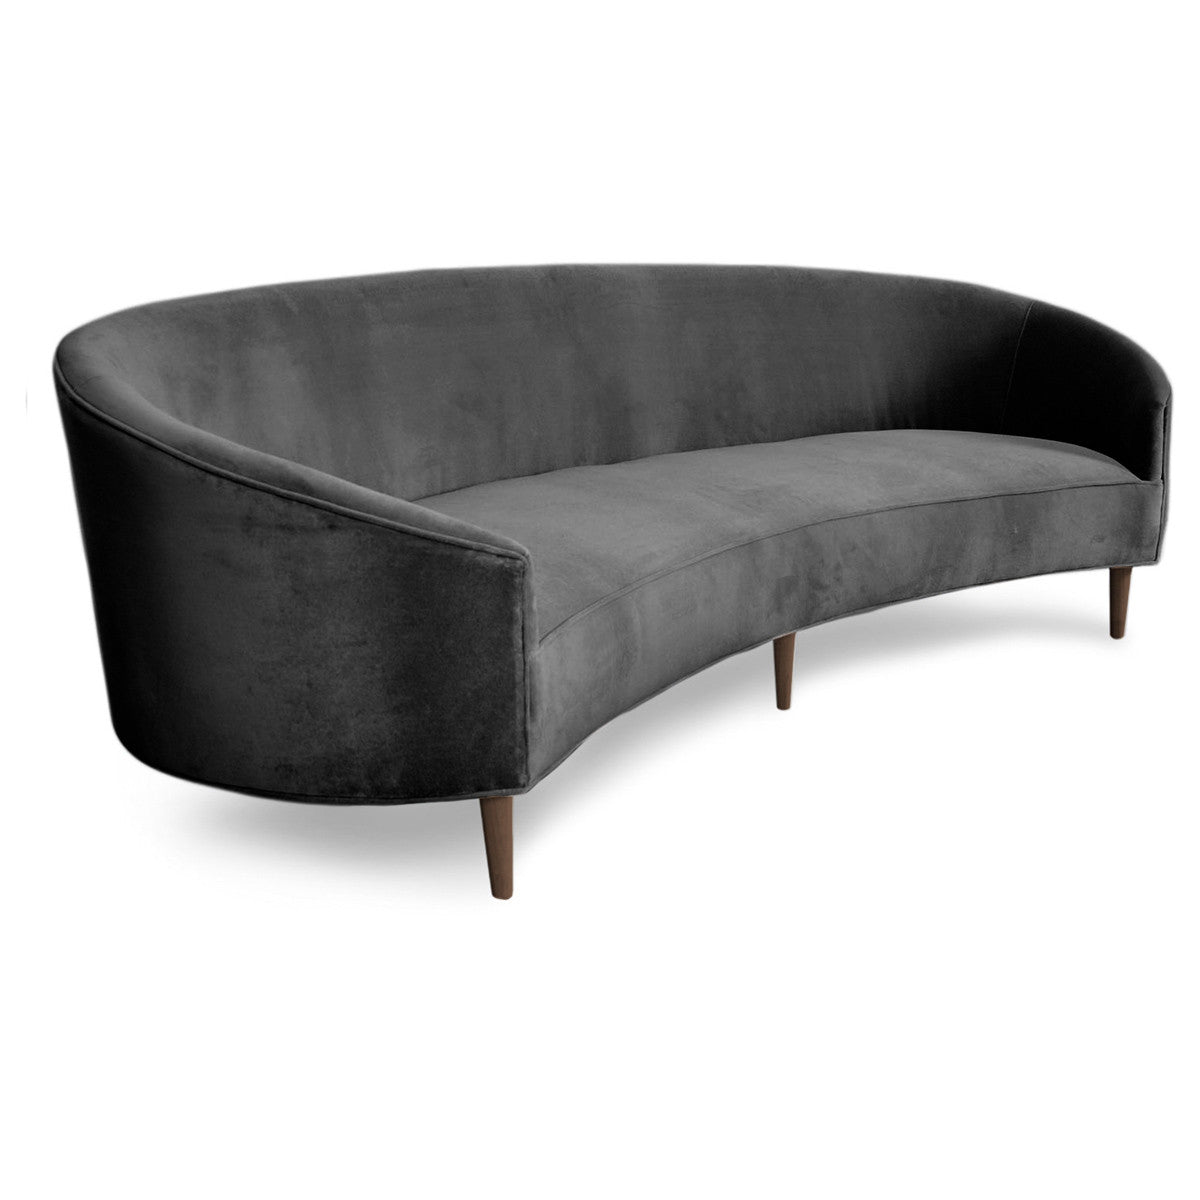 Art Deco Style Crescent Sofa With Curved Arms Modshop